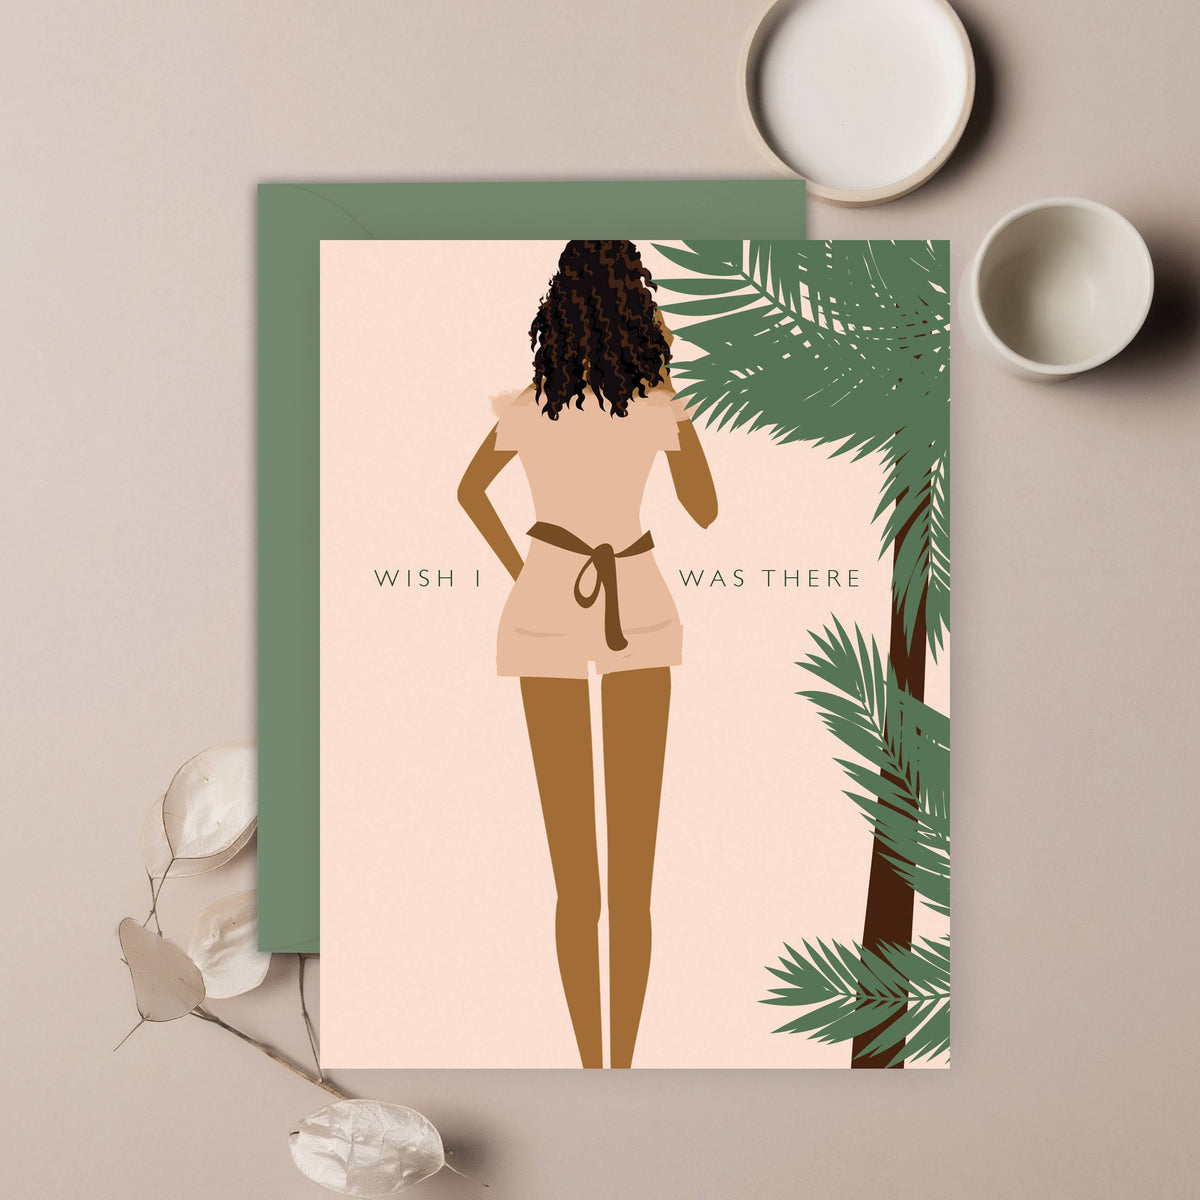 Wish I was there Greeting Card